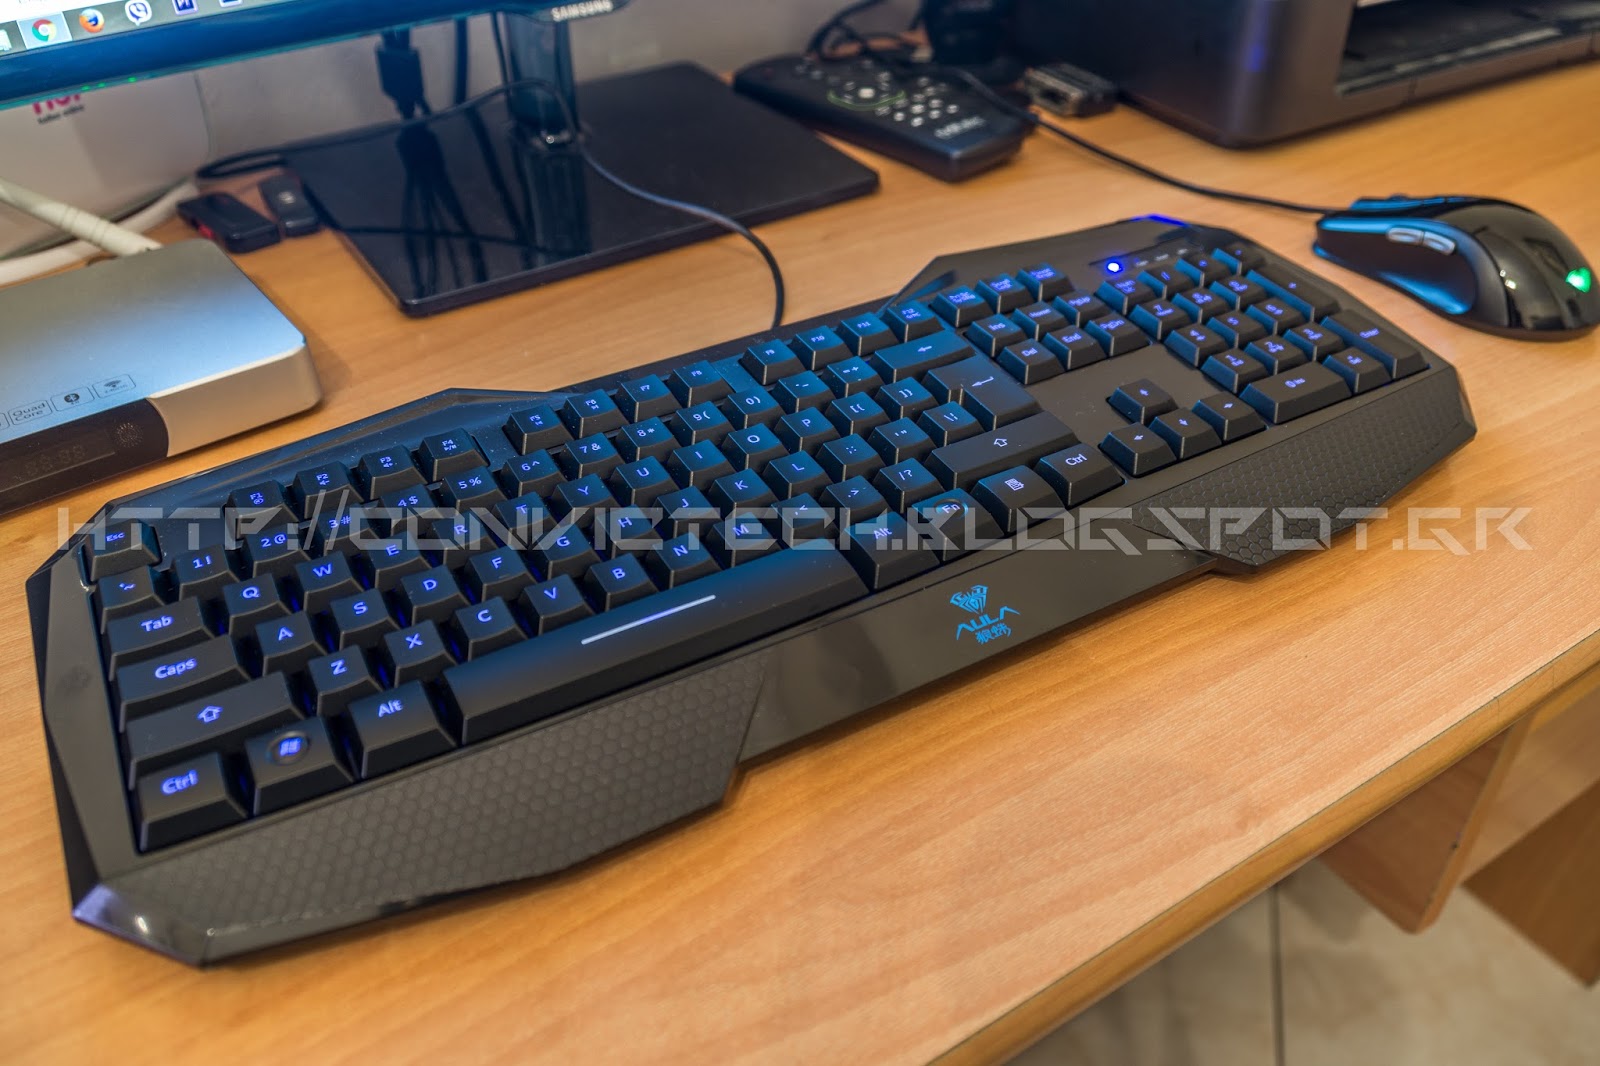 ConvicTech: Review of the Aula Gaming Keyboard/Mouse Combo from Gearbest